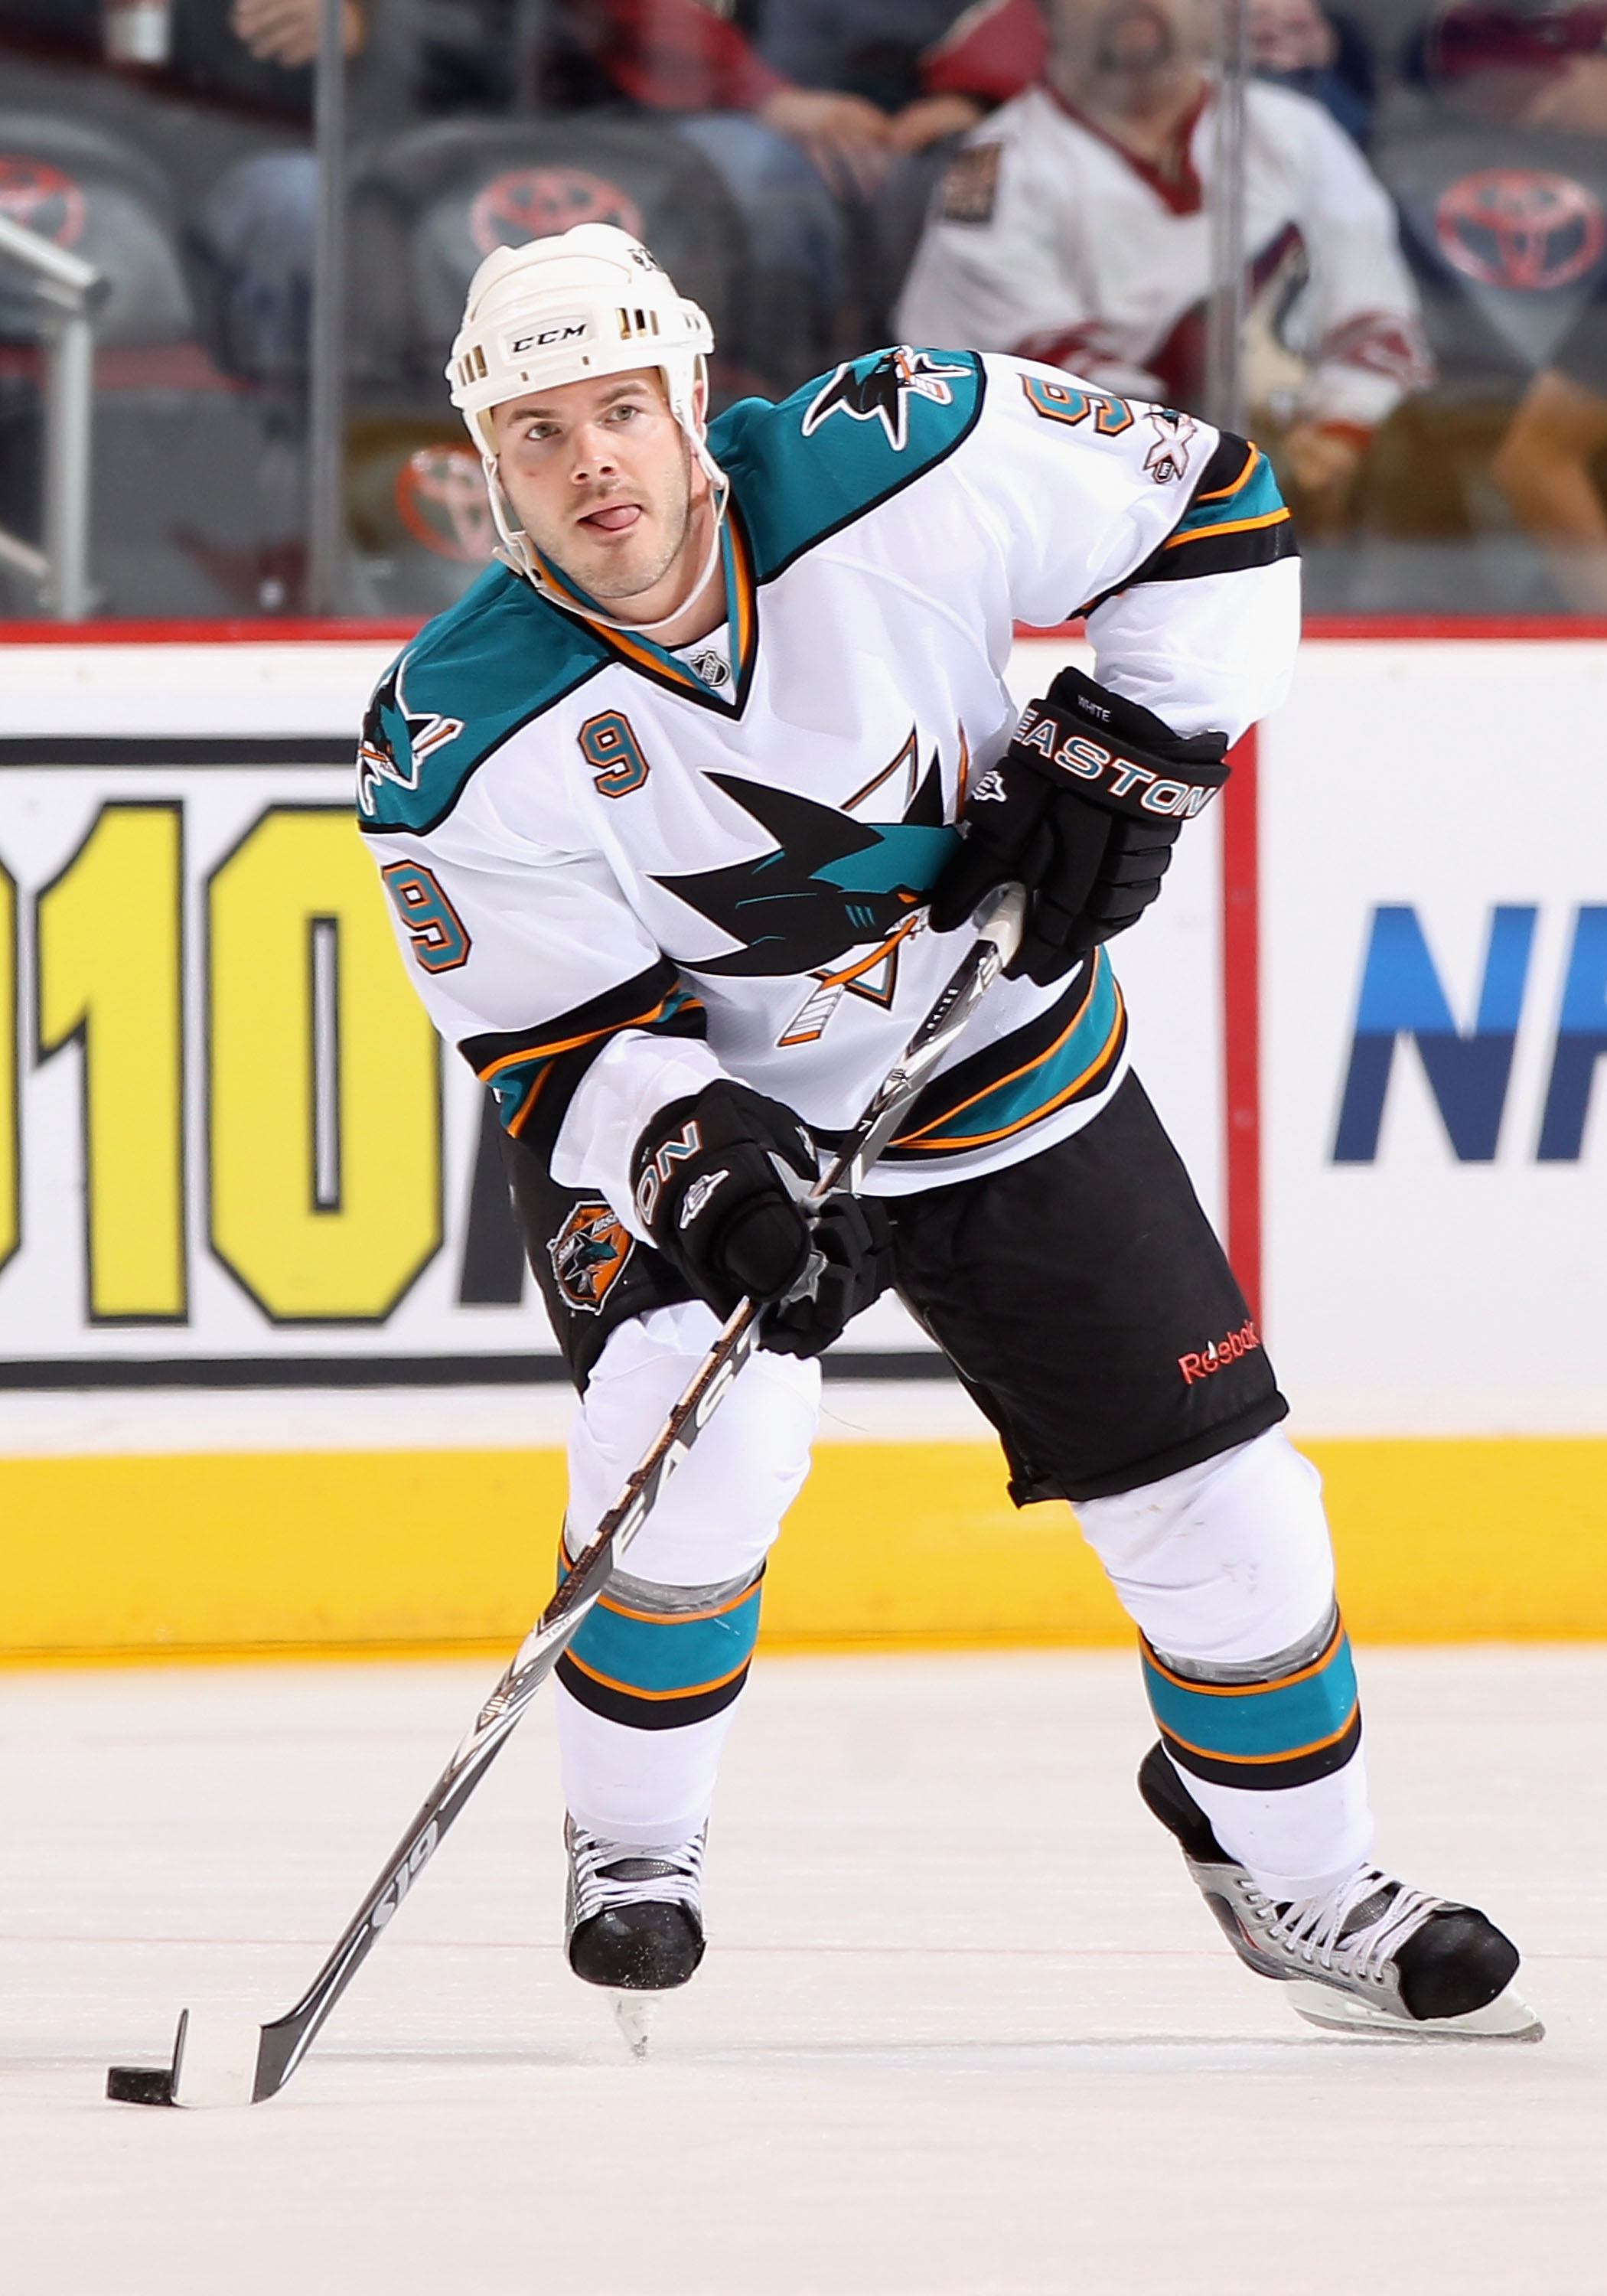 Patrick Marleau, Dany Heatley Have to Rid Sharks of Playoff Curse